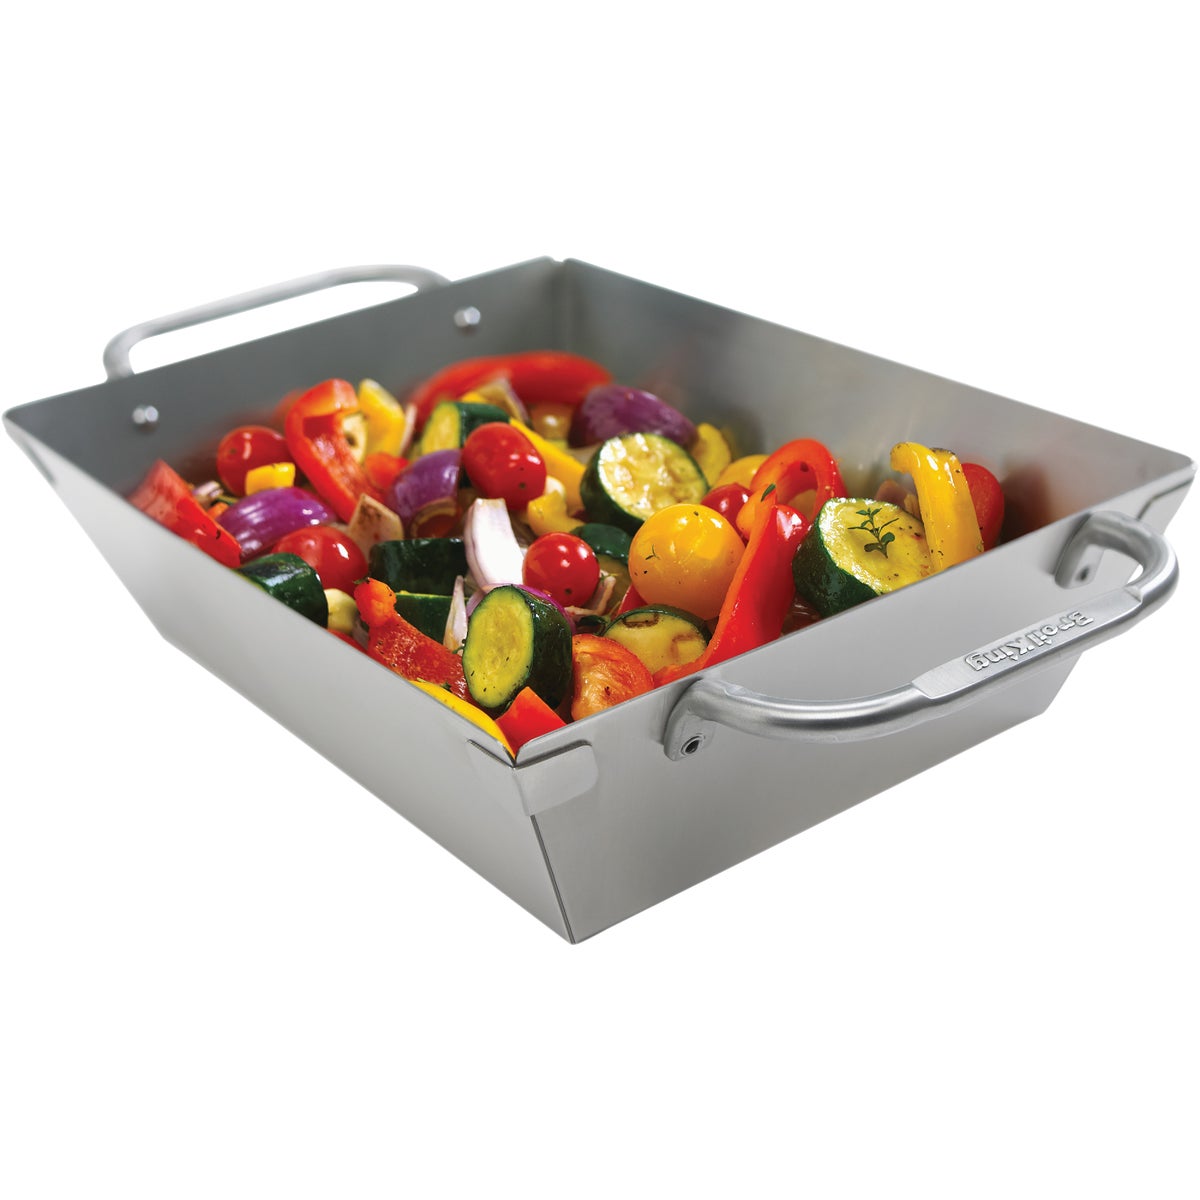 Broil King Imperial 13 In. W. x 9.75 In. L. Stainless Steel Grill Wok Topper Tray